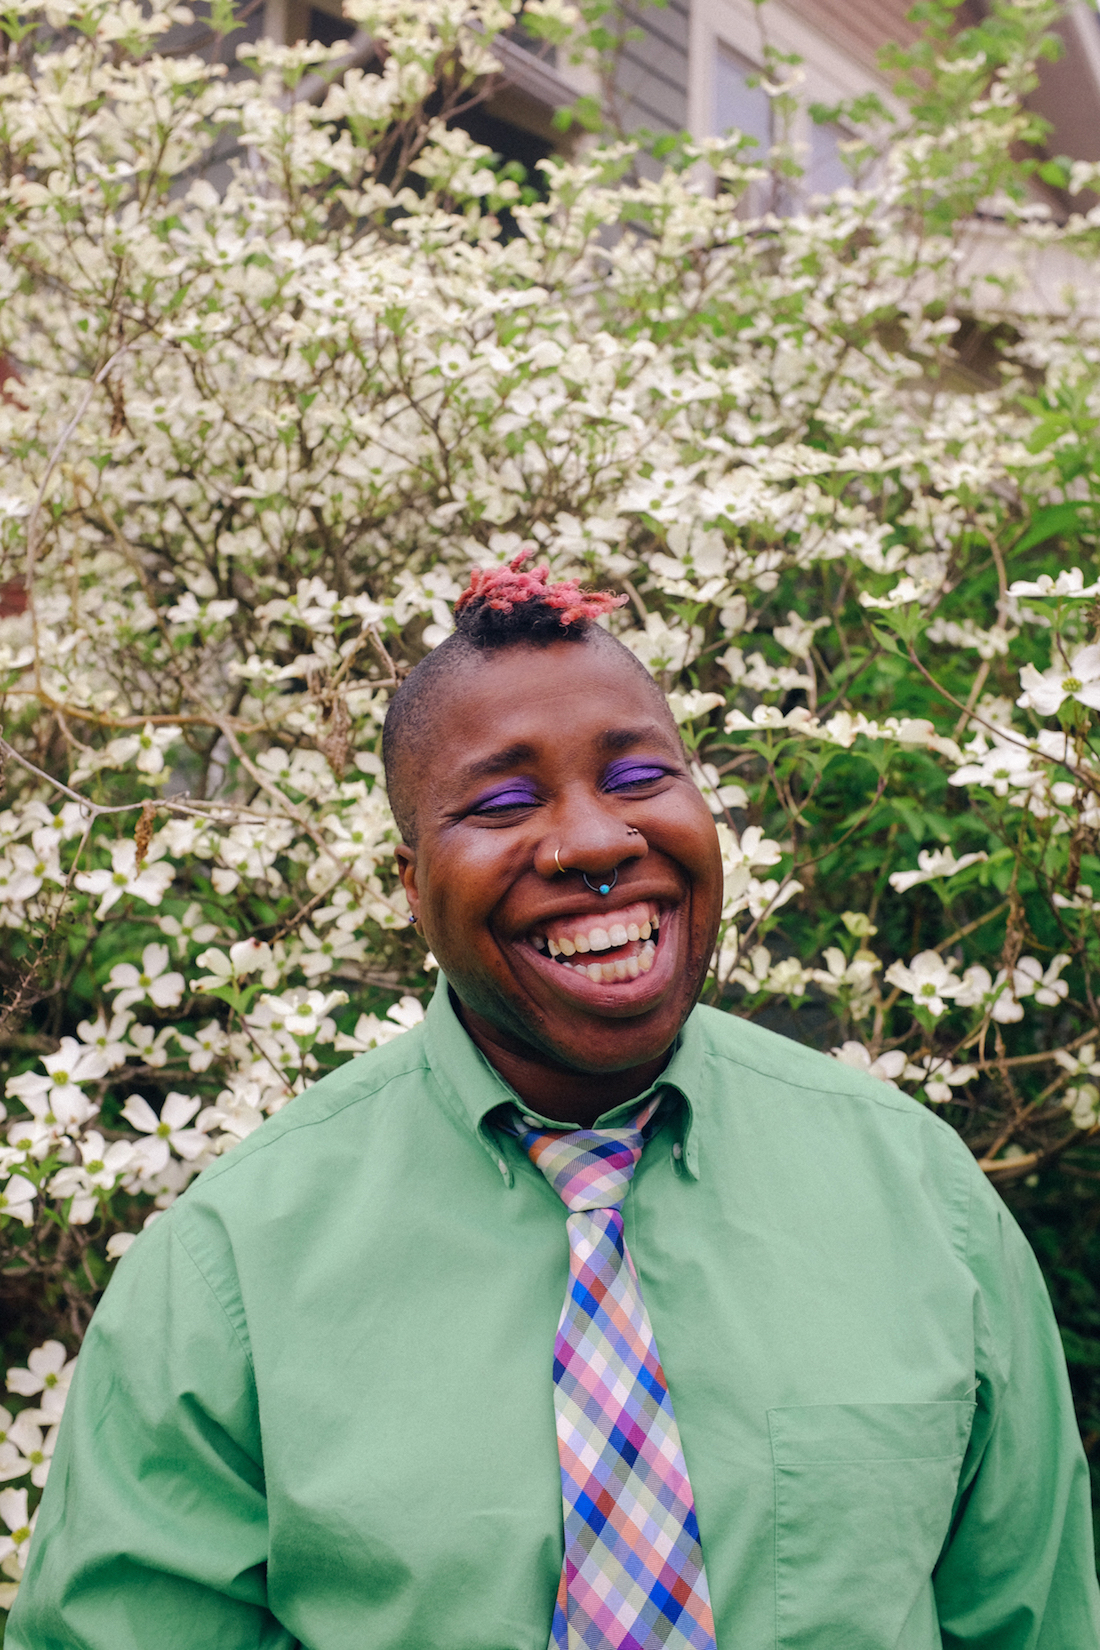 Composer and performer Sharon Udoh, an African American woman with a short colored mohawk wearing a green button-up shirt and a plaid tie, stands smiling in front of a tall bush with white flowers